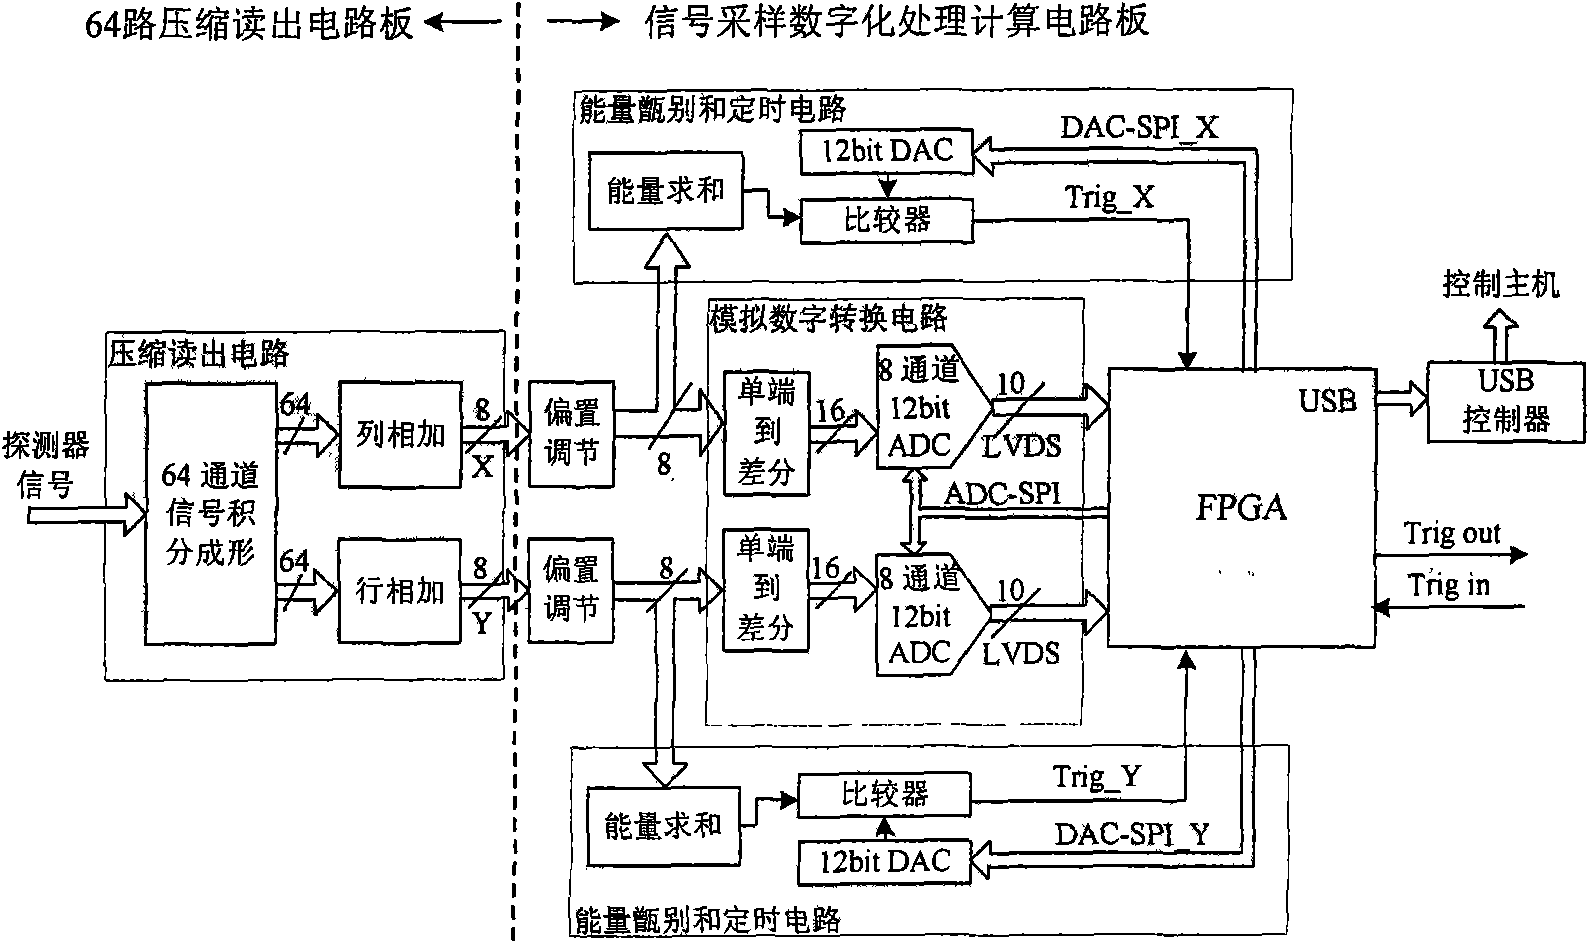 Signal processing equipment of PET detector based on neural network localizer